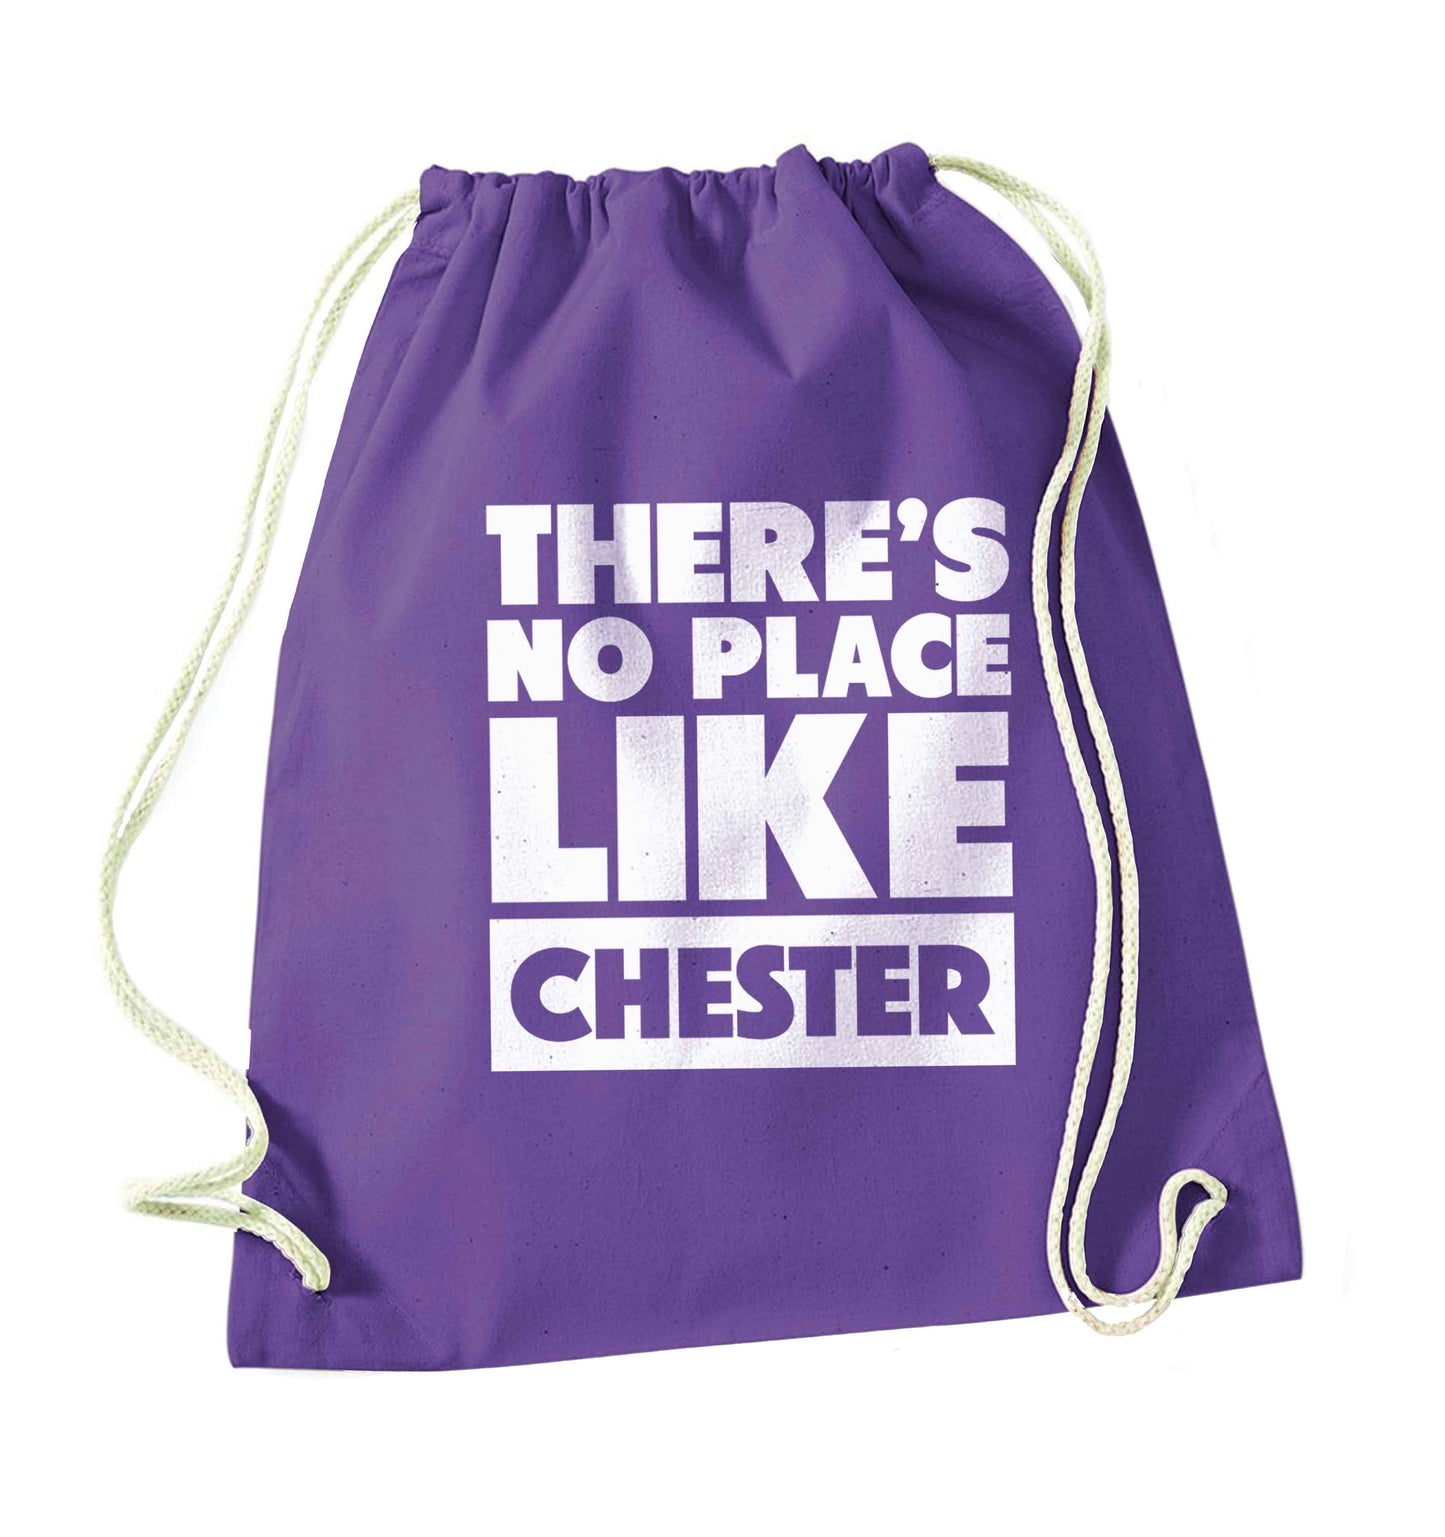 There's no place like Chester purple drawstring bag